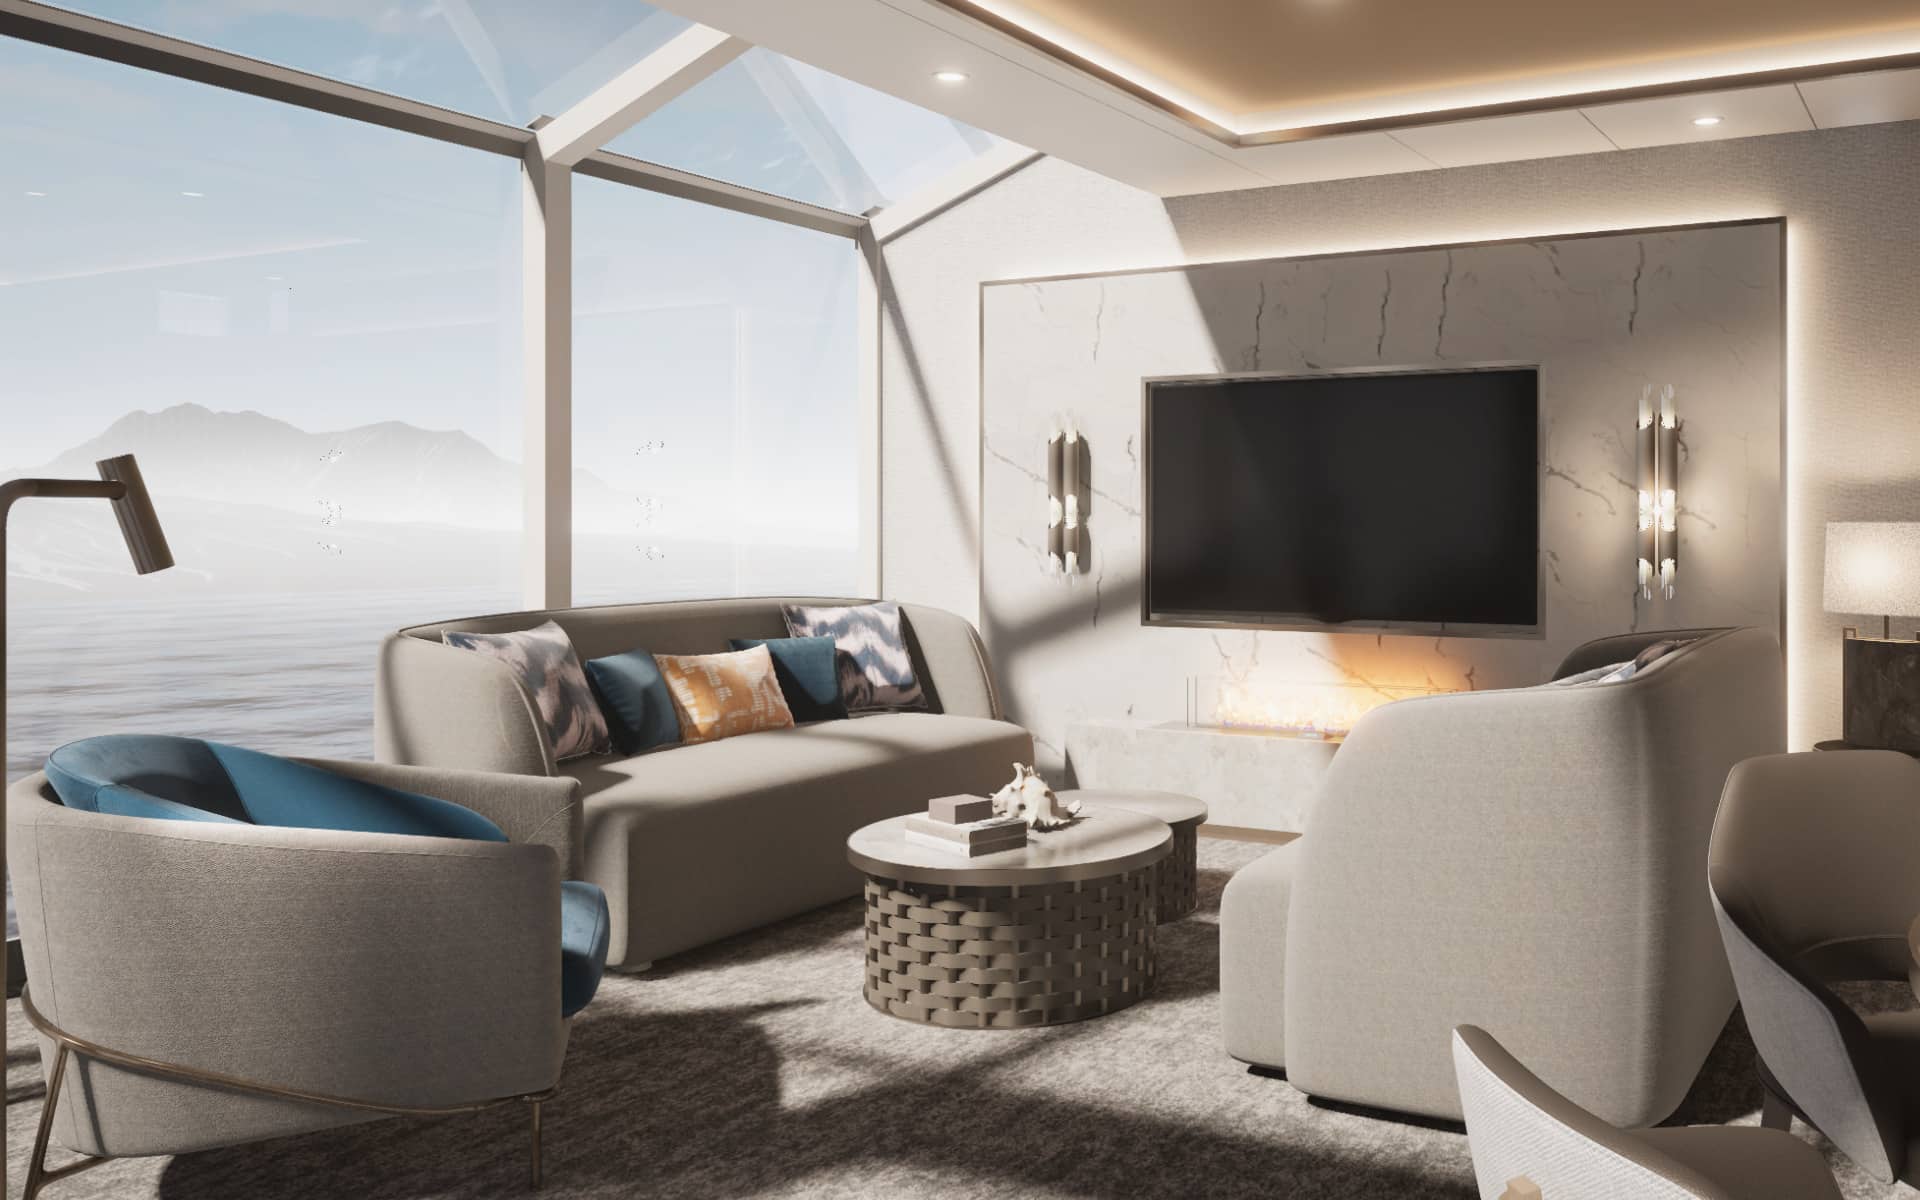 The living area in the new Master Suite on Silver Endeavour (rendering).